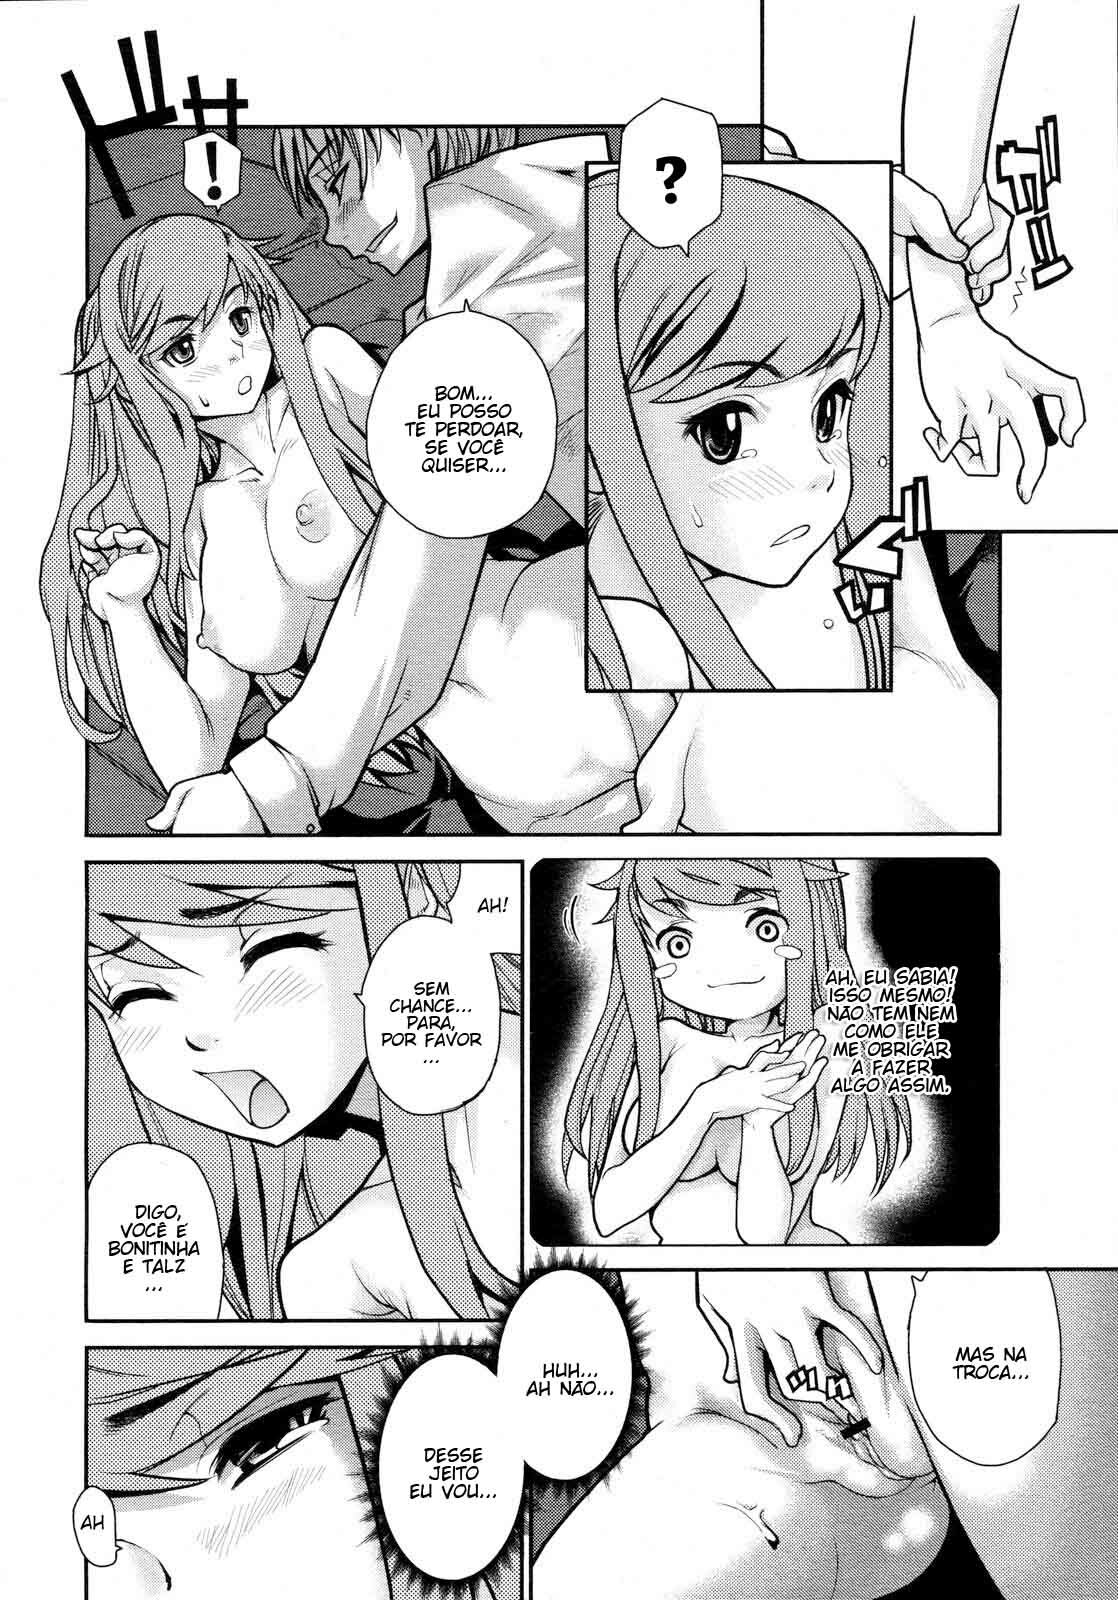 [Pafu²] Wise Ass Completo (BR) page 10 full